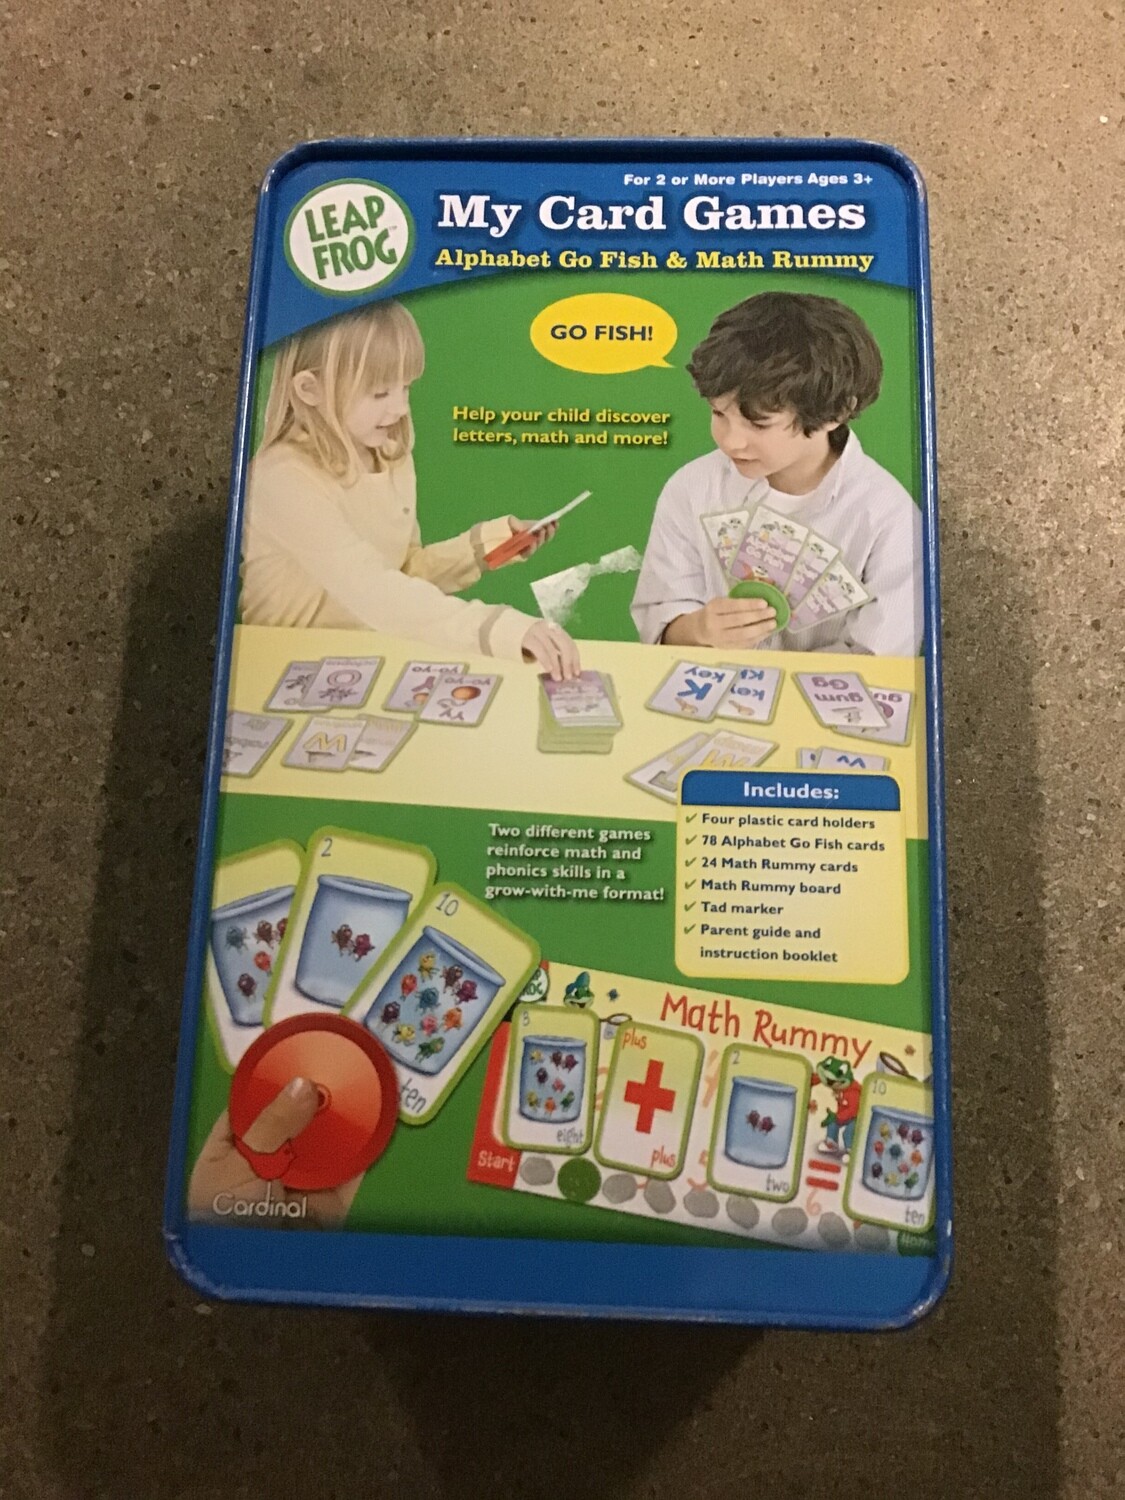 My card Games for kids